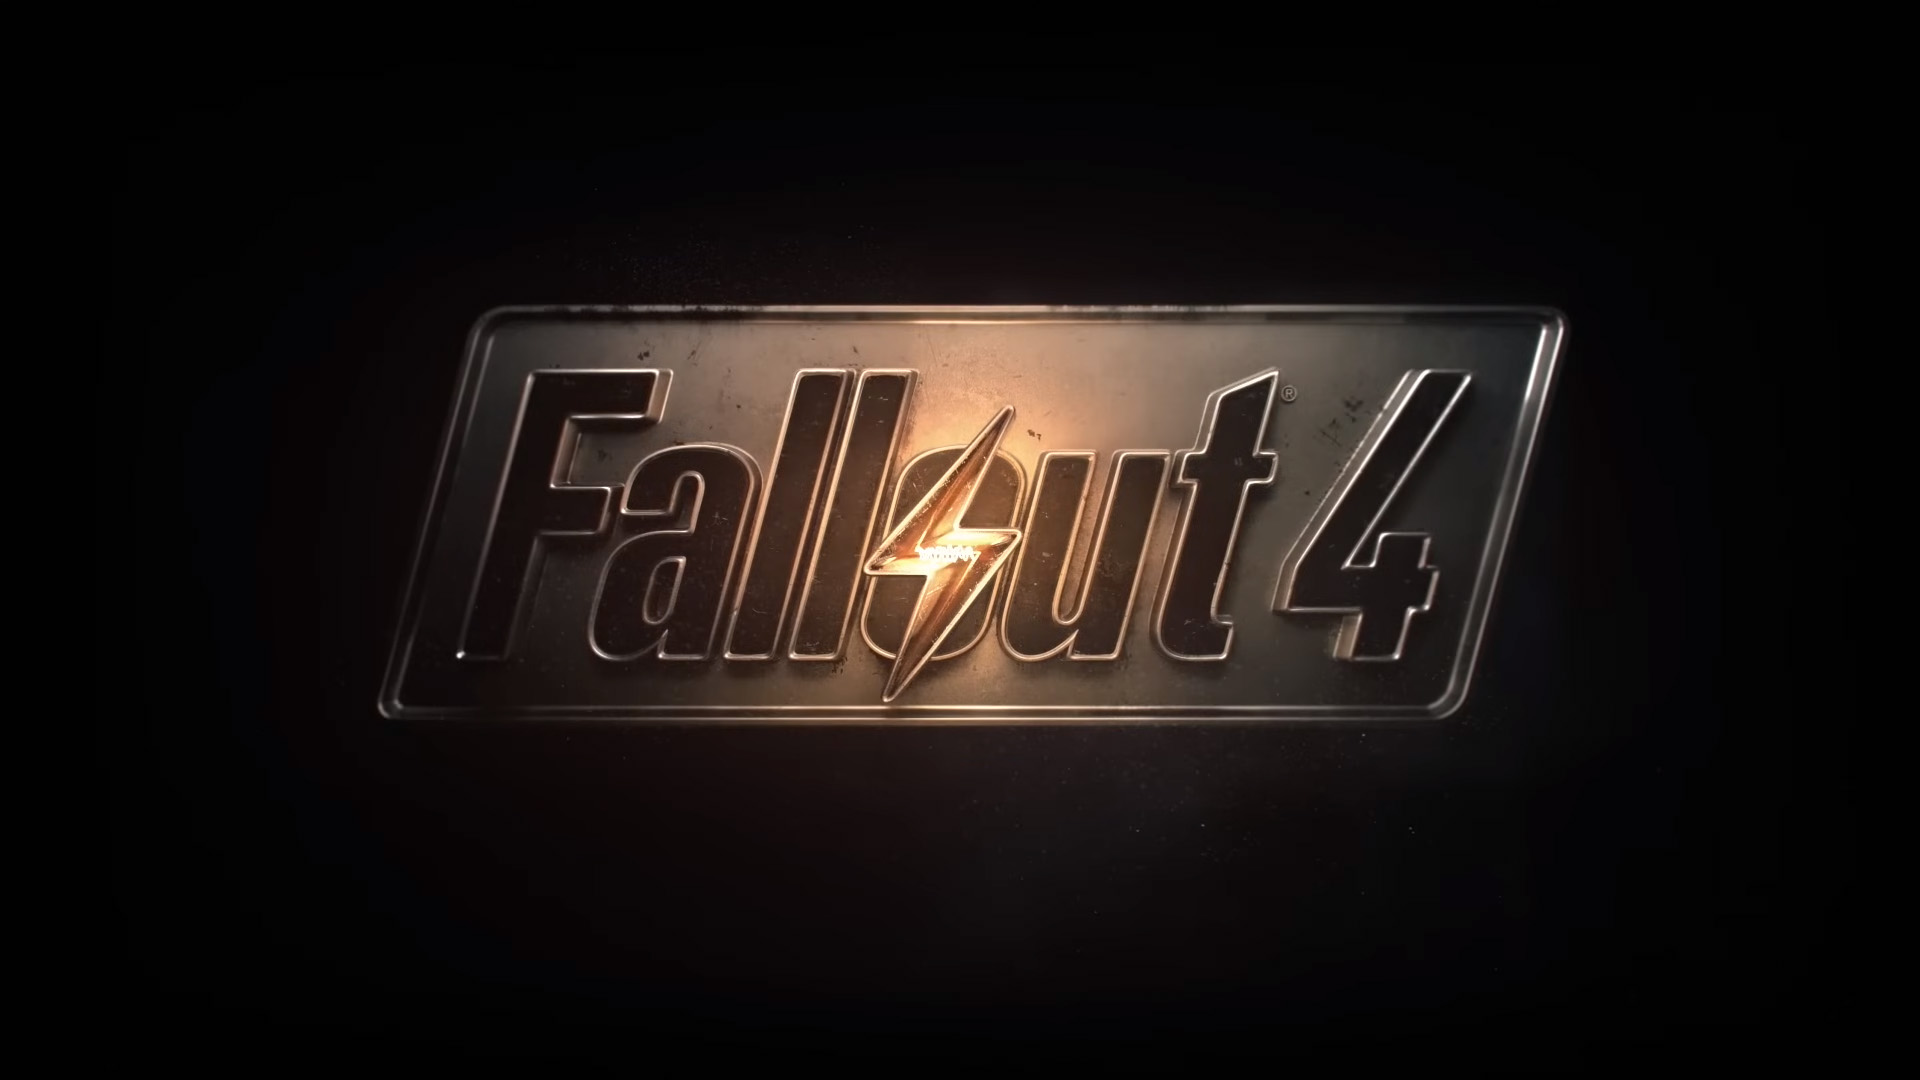 Fallout 4 Free Upgrade - Next-Gen Consoles, New Quest, Armor, Weapons